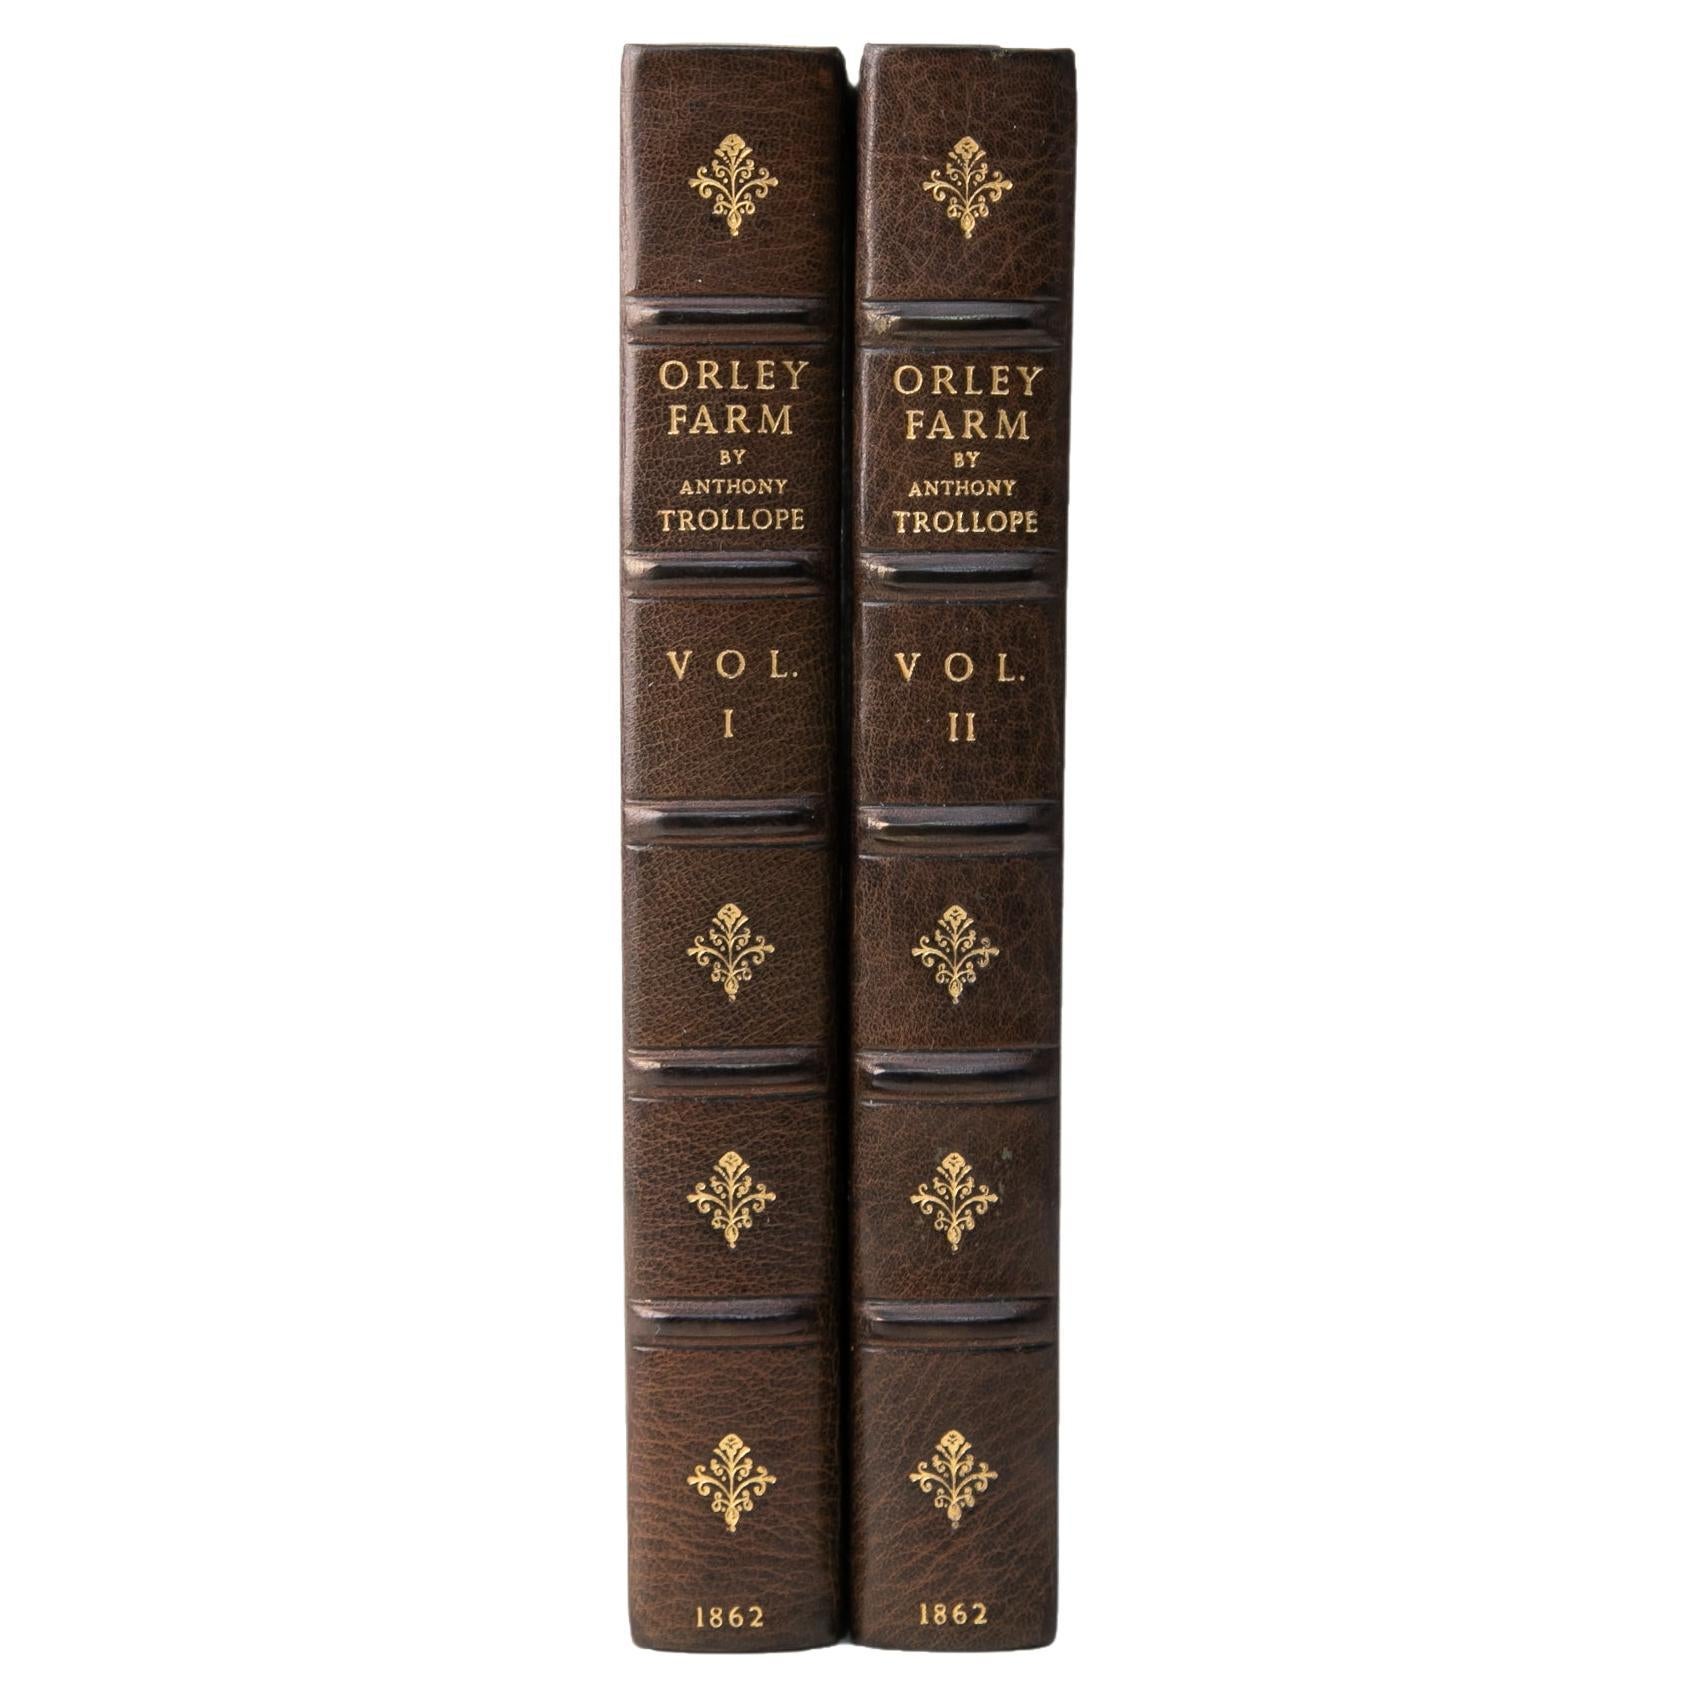 2 Volumes. Anthony Trollope, ferme Orley.